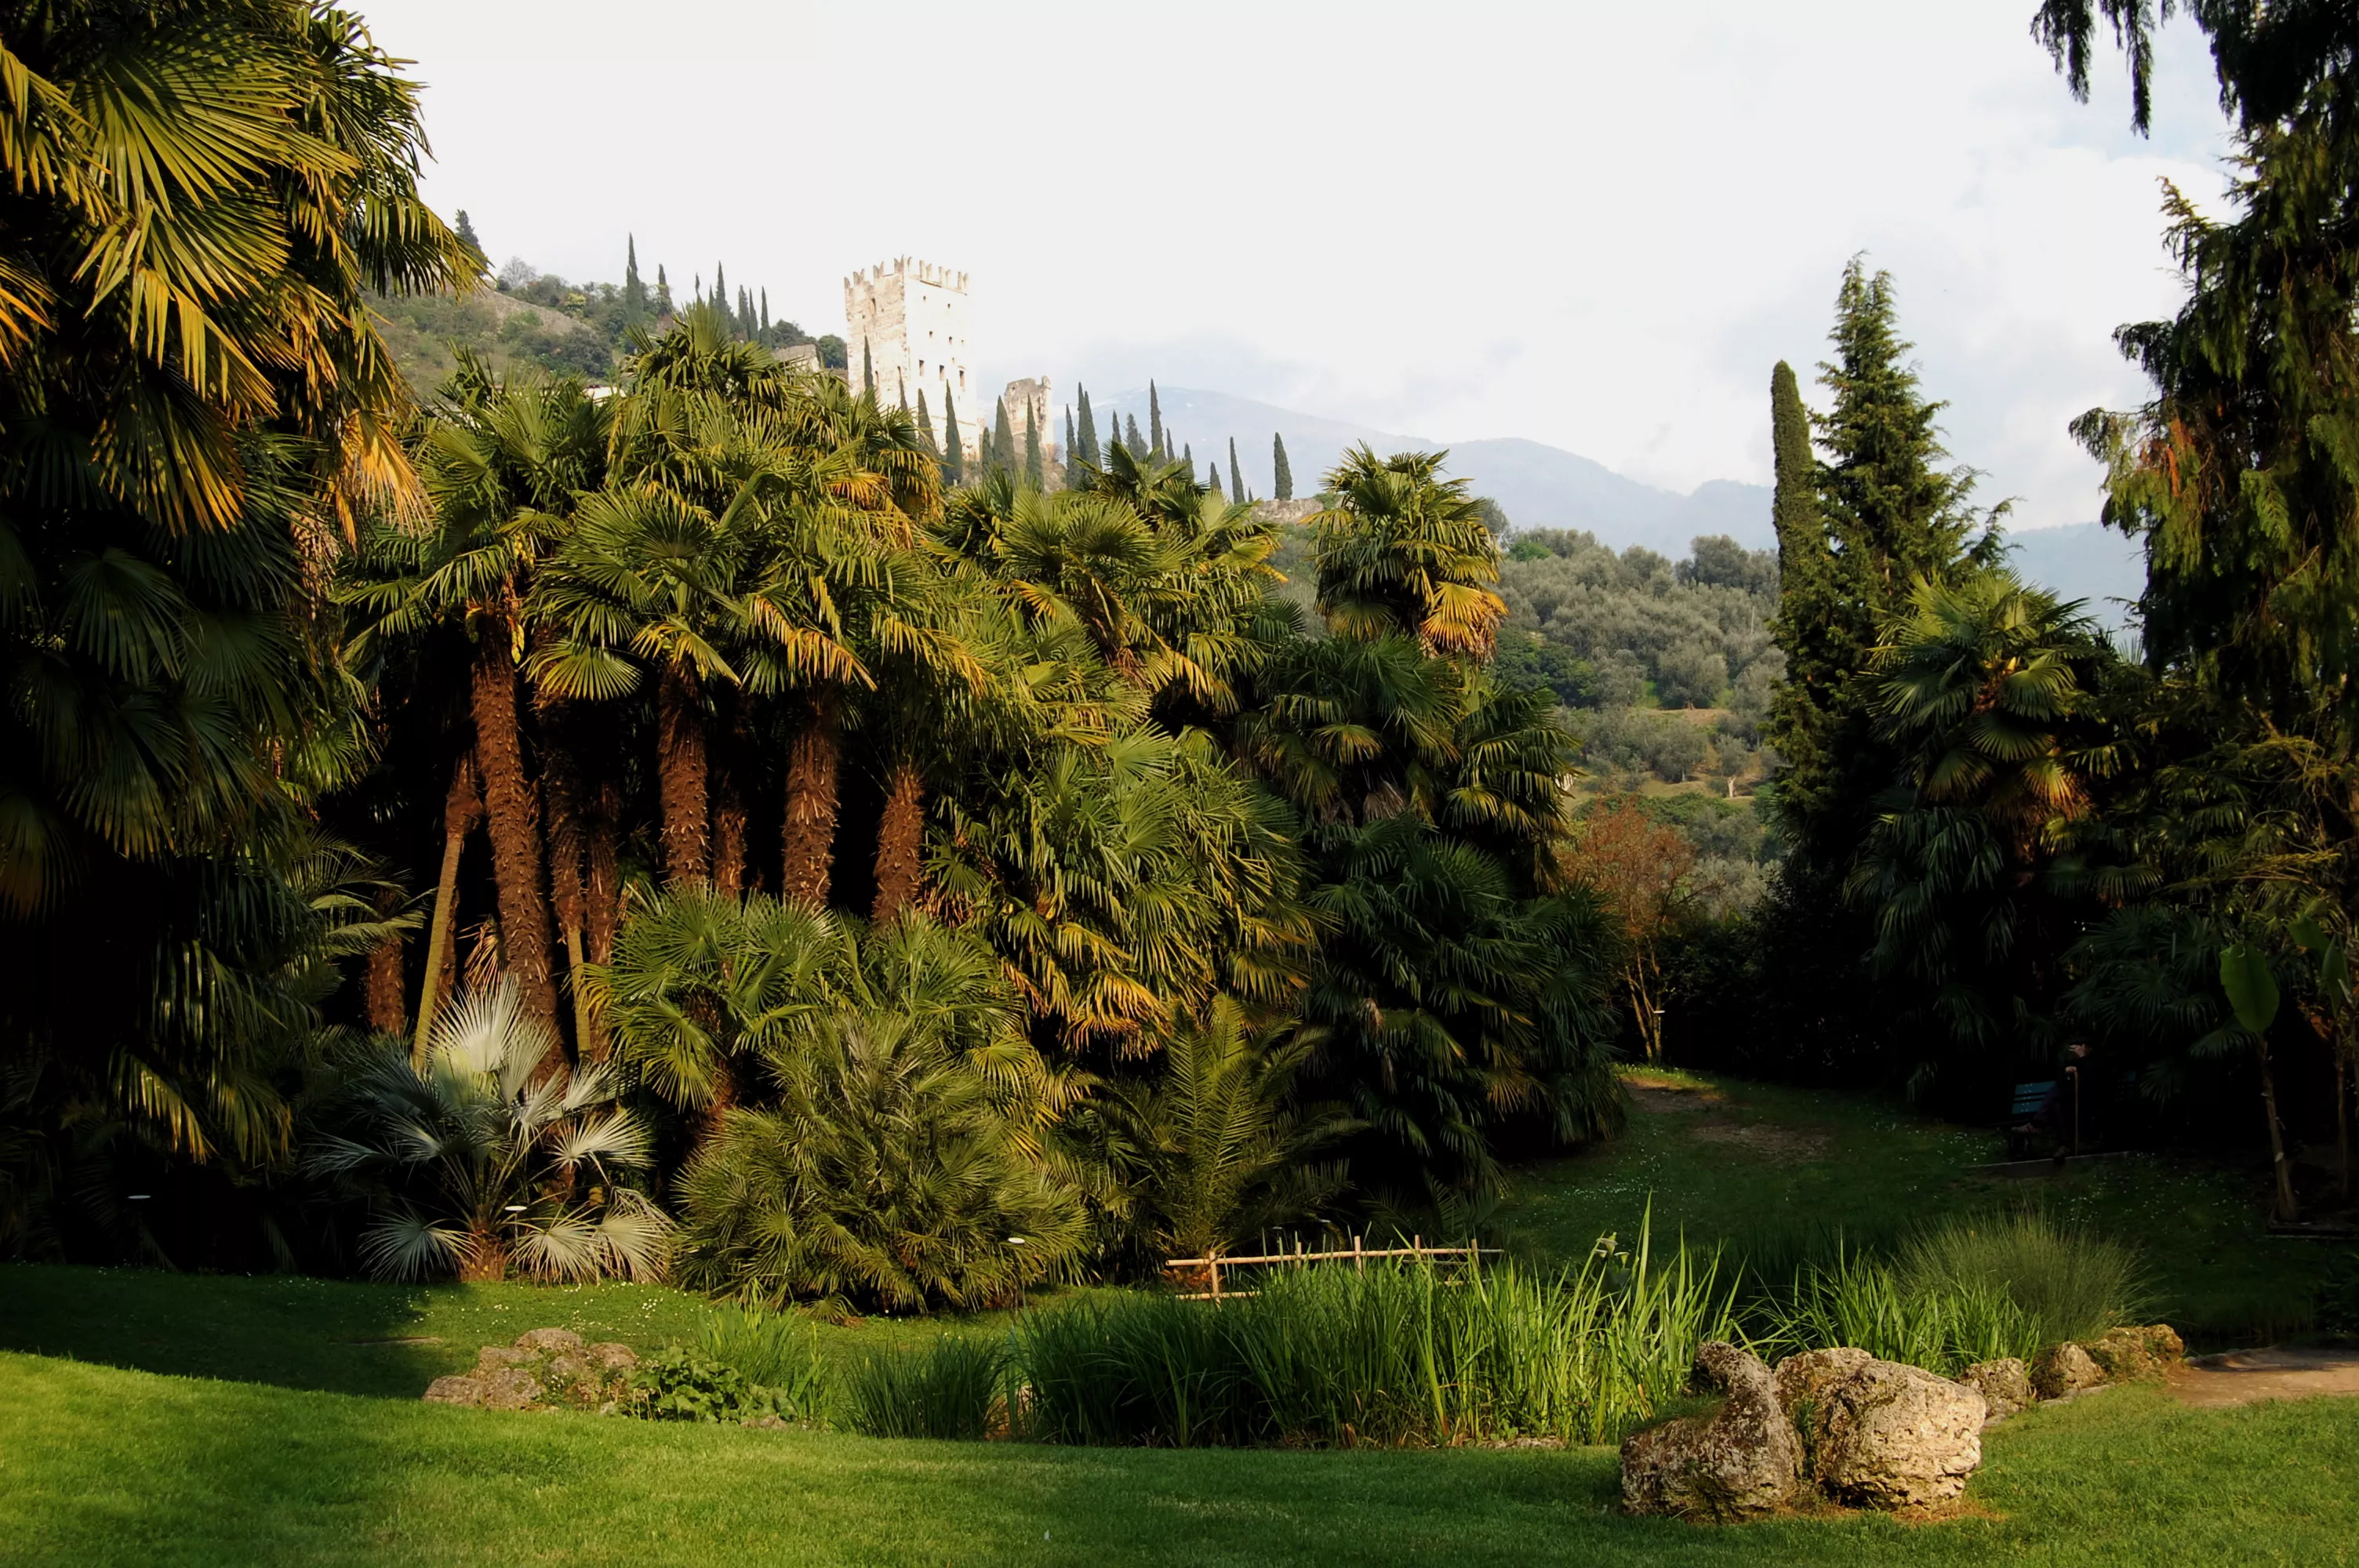 Arboretum of Arco in Italy, Europe | Gardens - Rated 3.6